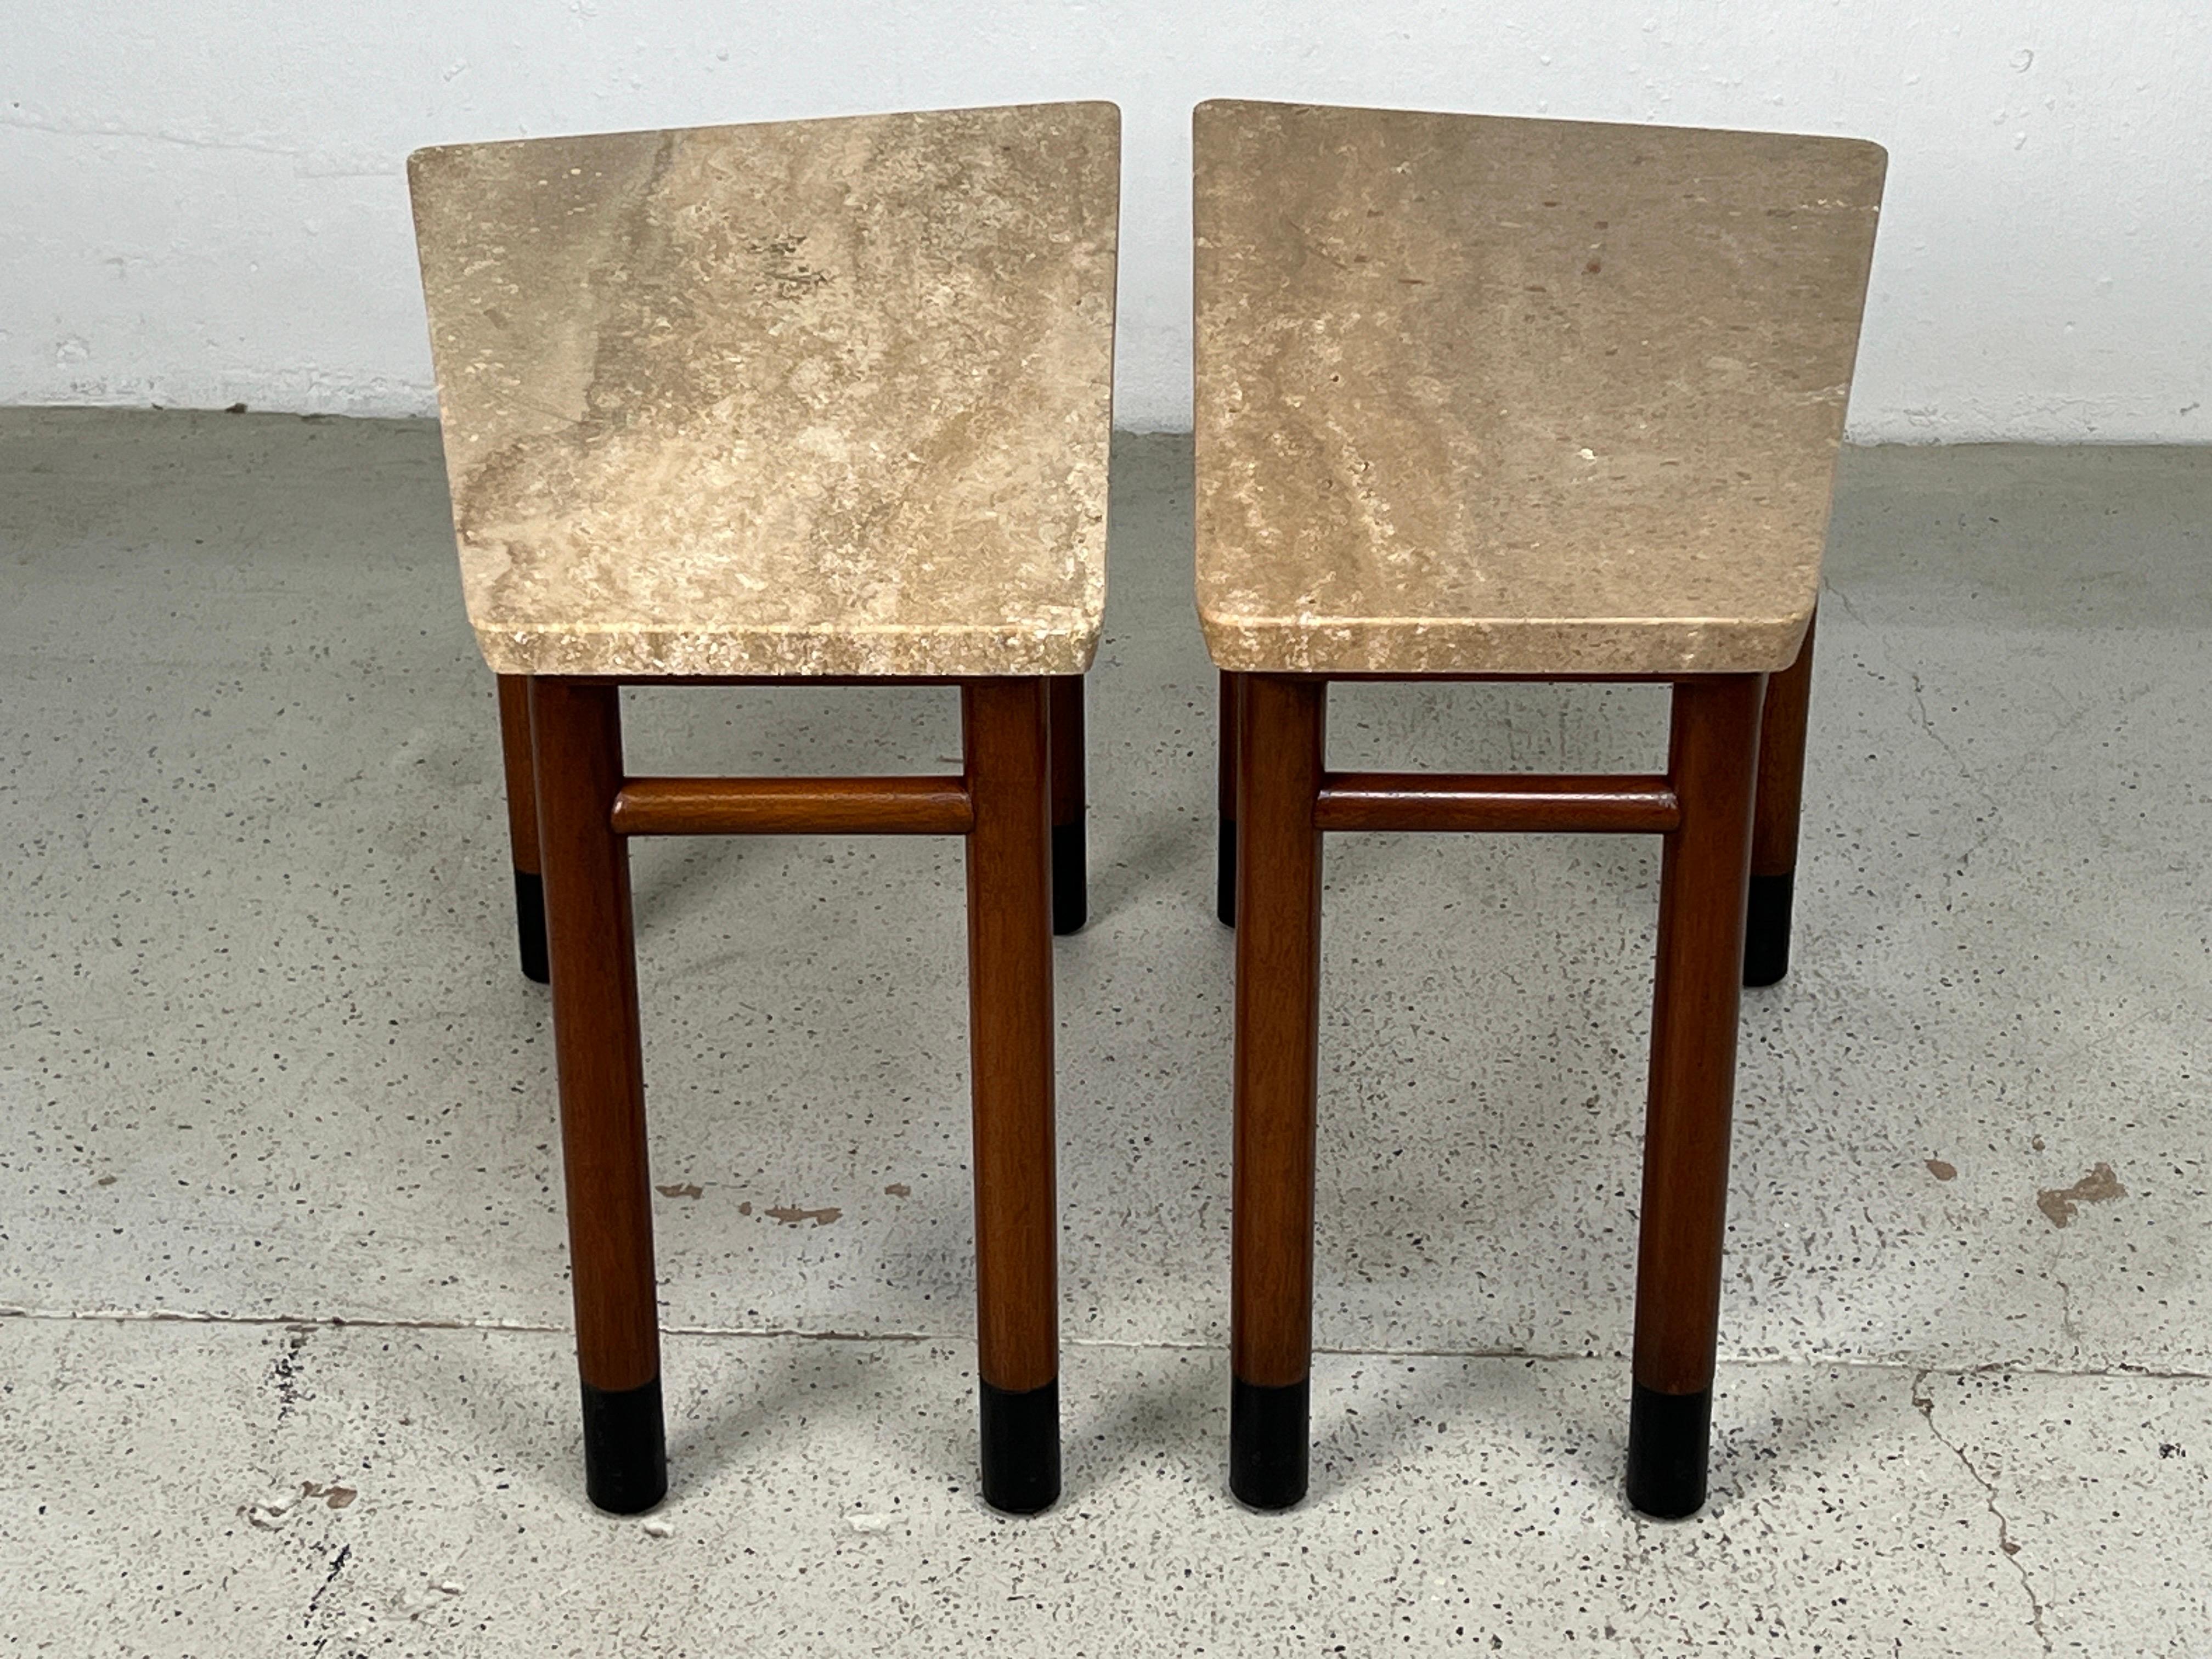 Pair of Wedge Shaped Travertine Tables by Edward Wormley for Dunbar For Sale 7